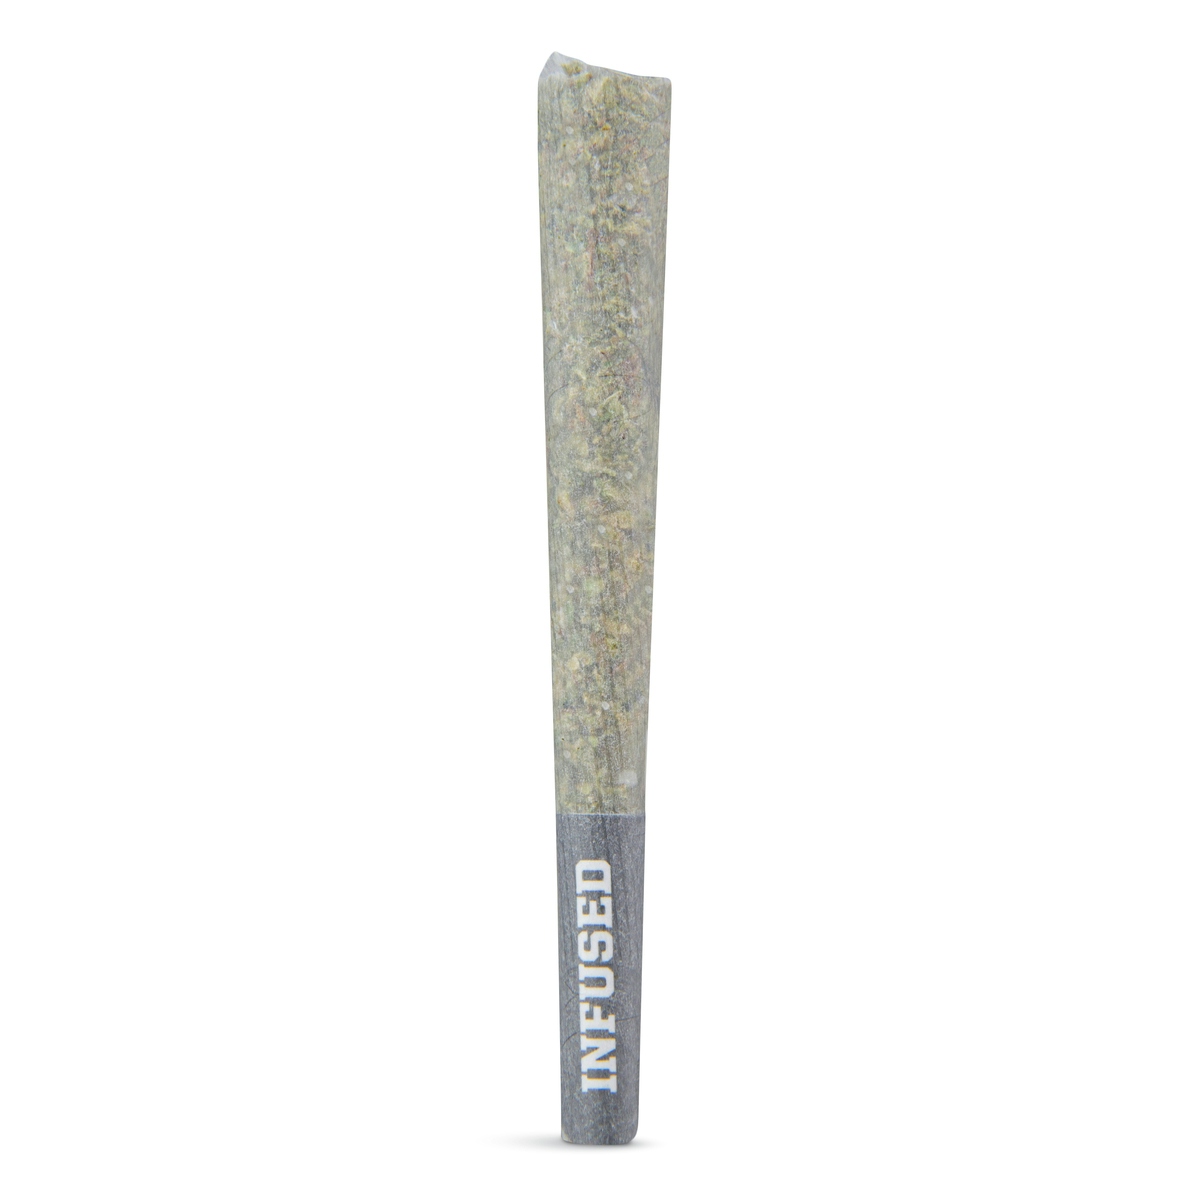 Garlic Z | Indica - Diamond THCA-Infused Pre-Roll - 1G Joint